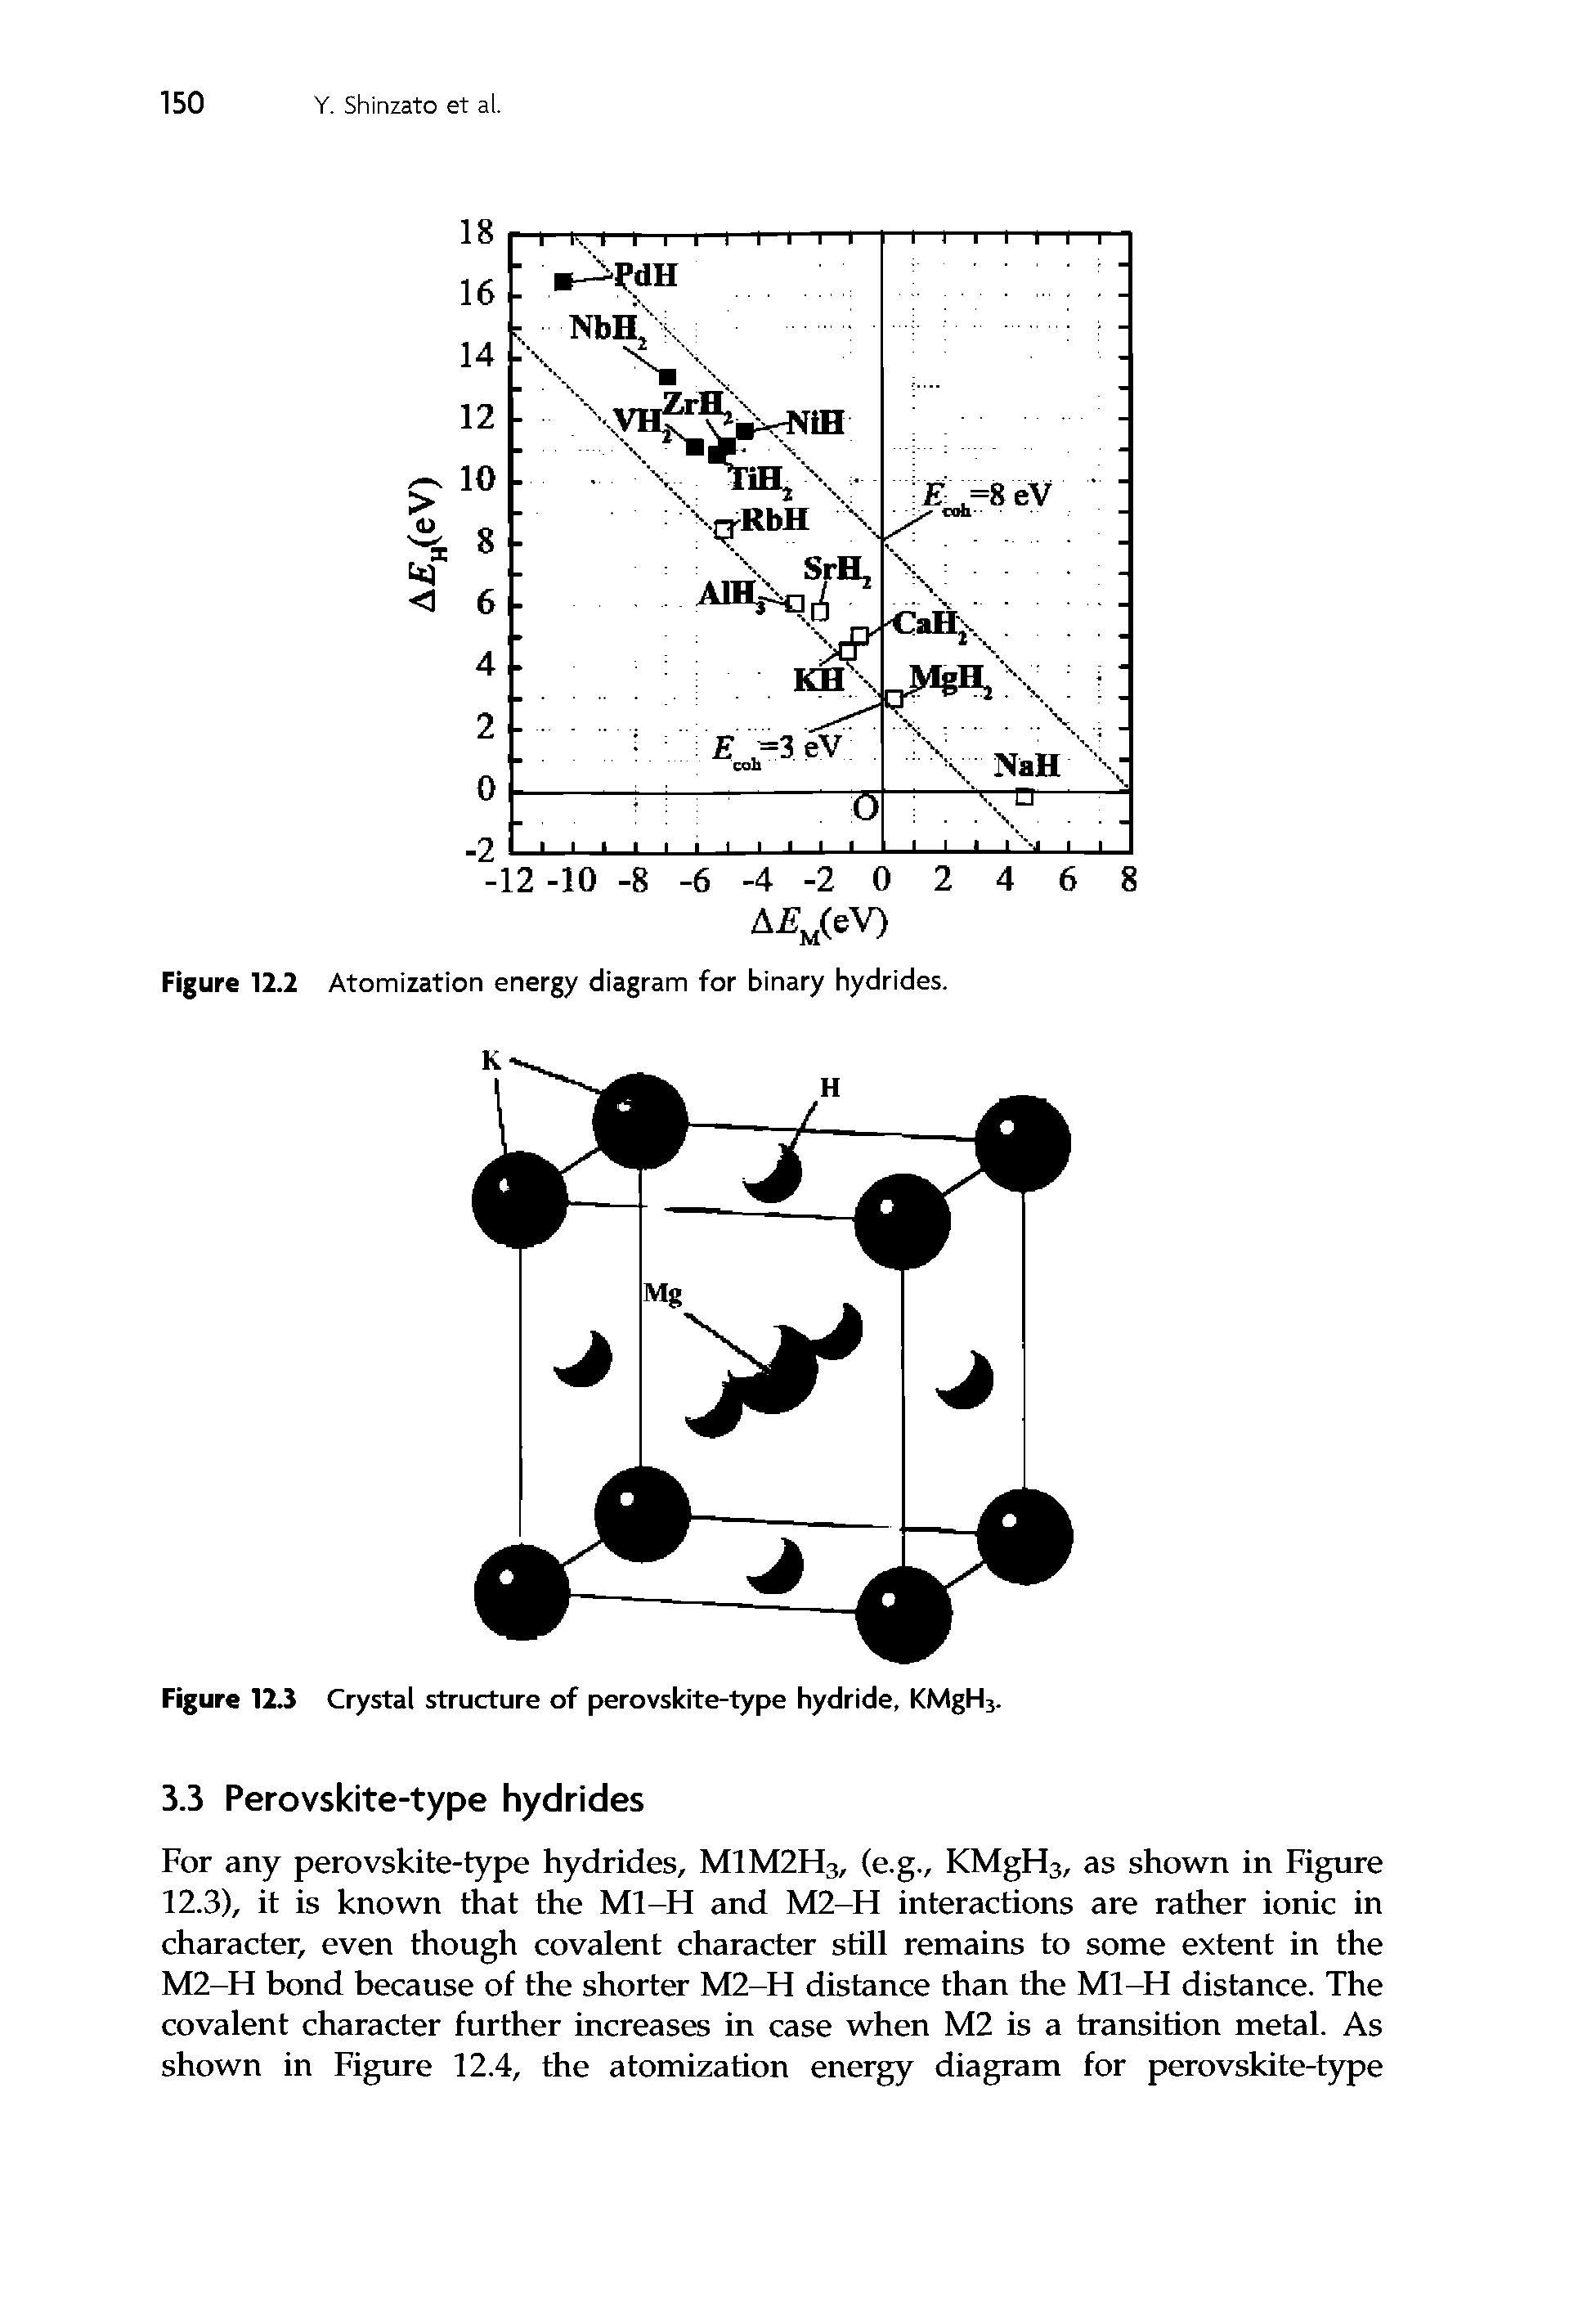 Figure 12.2 Atomization energy diagram for binary hydrides.